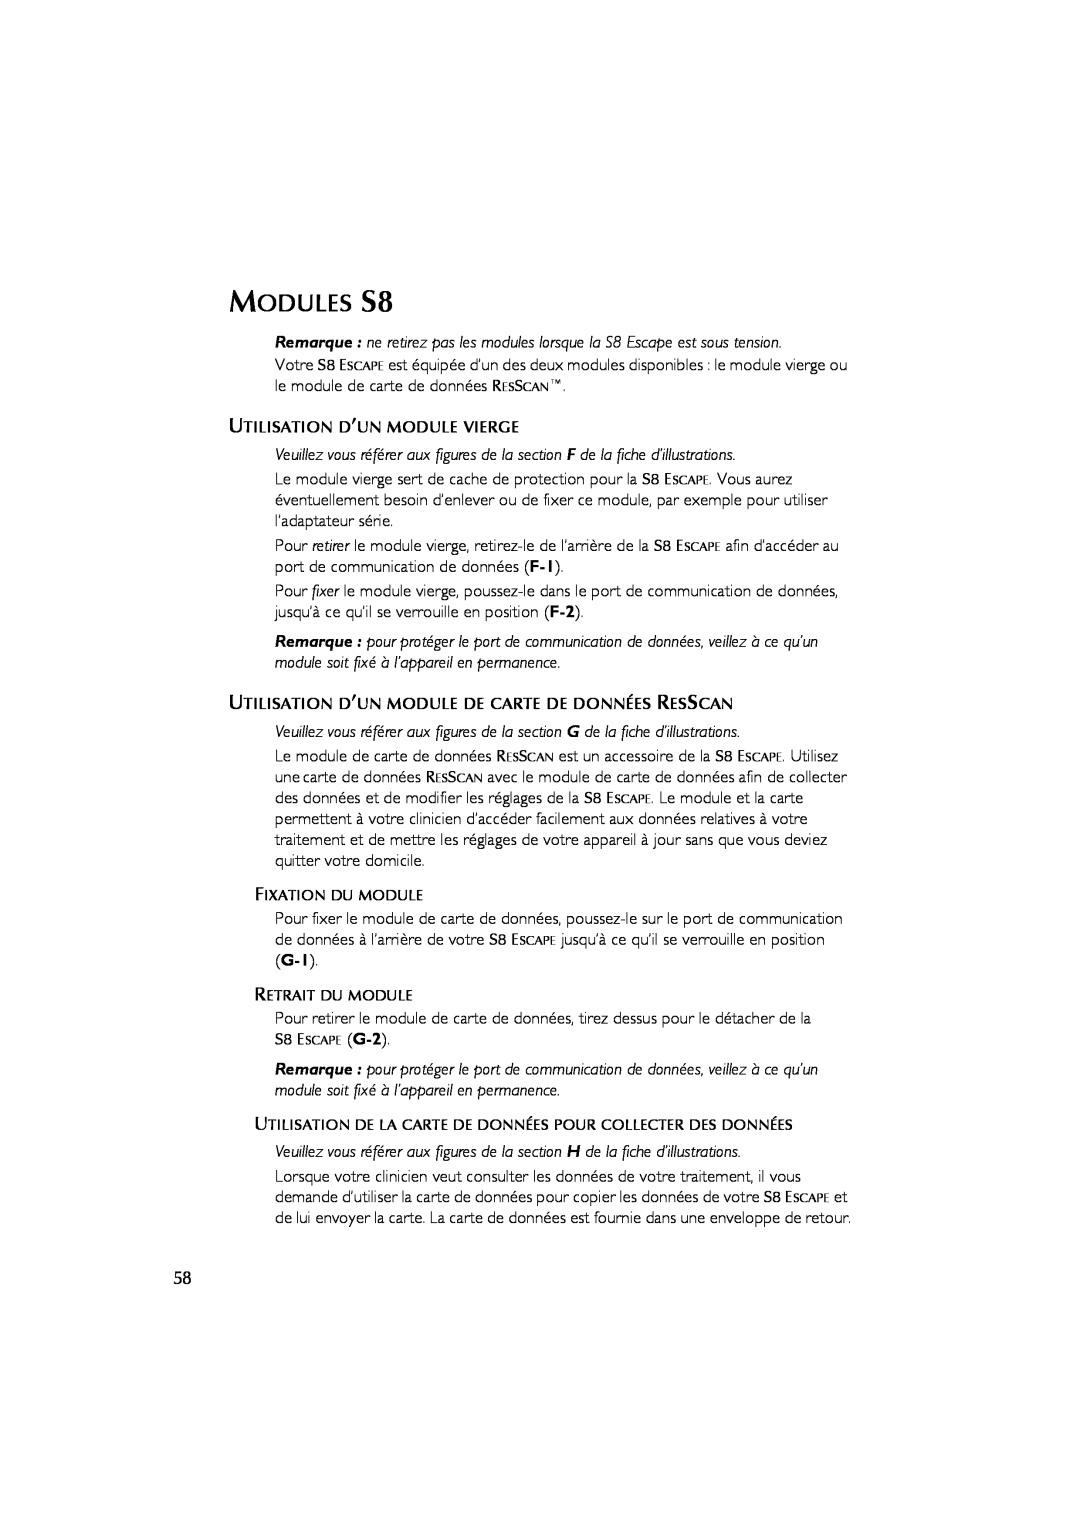 ResMed s8 user manual MODULES S8 